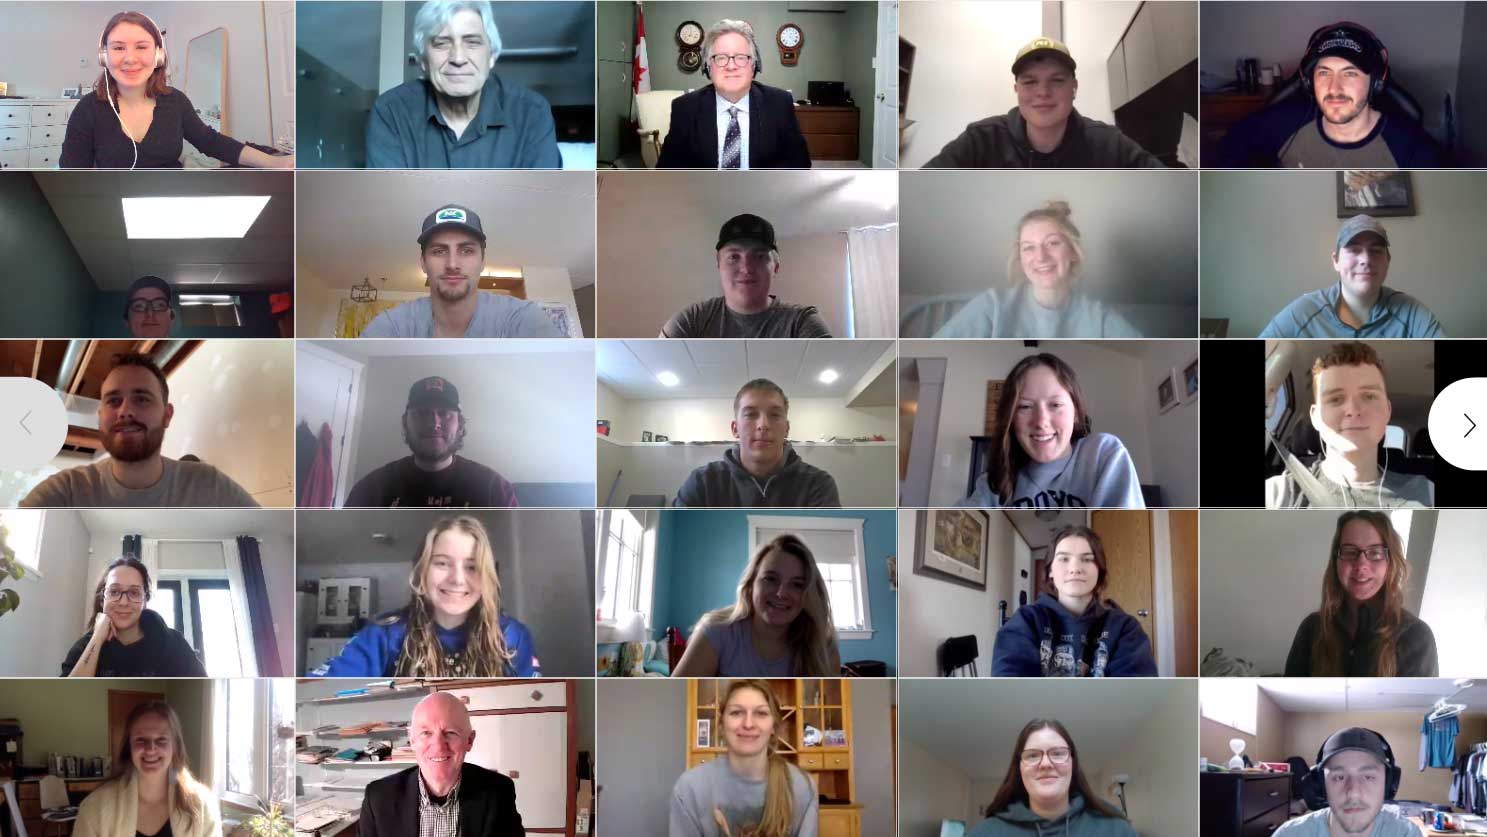 Thursday, March 4, 2021 – Senator Rob Black meets virtually with University of Manitoba students studying agriculture and food to discuss the role and the importance of the Senate, as well as agriculture and food issues.